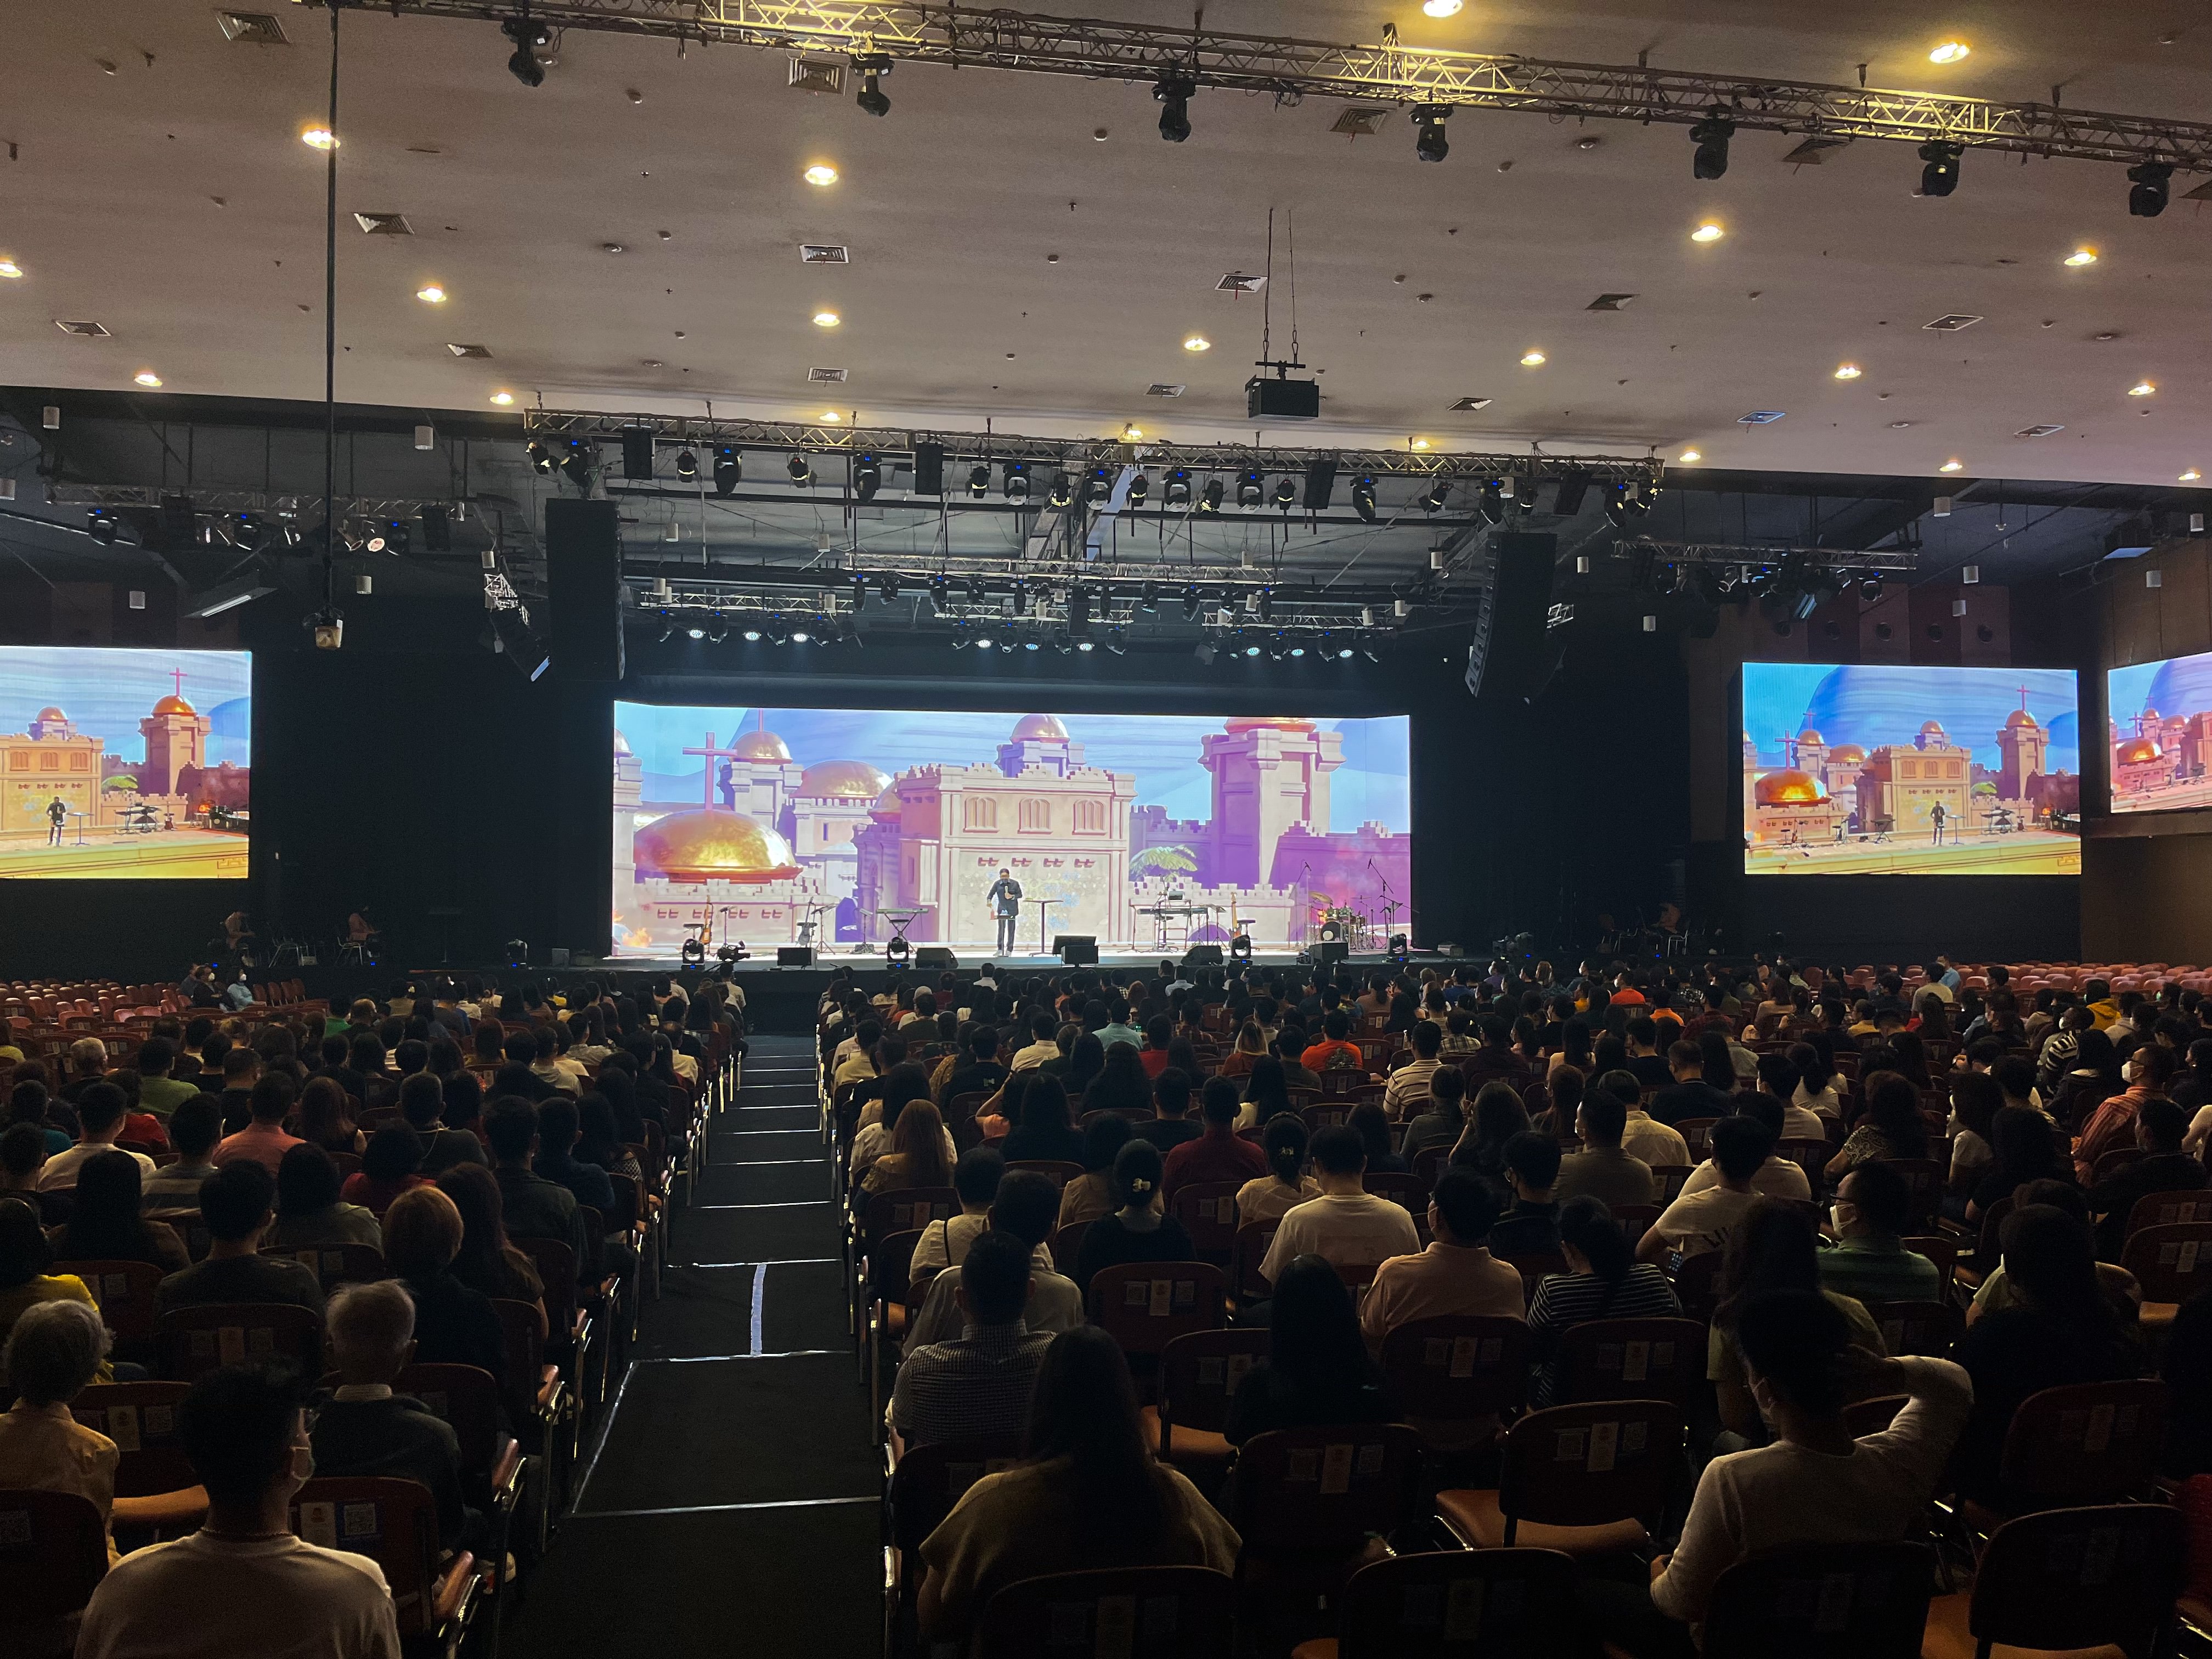 V2 Indonesia-MCAS Group Becomes a Pioneer in the Use of eXtended Reality Technology for Houses of Worship in Asia